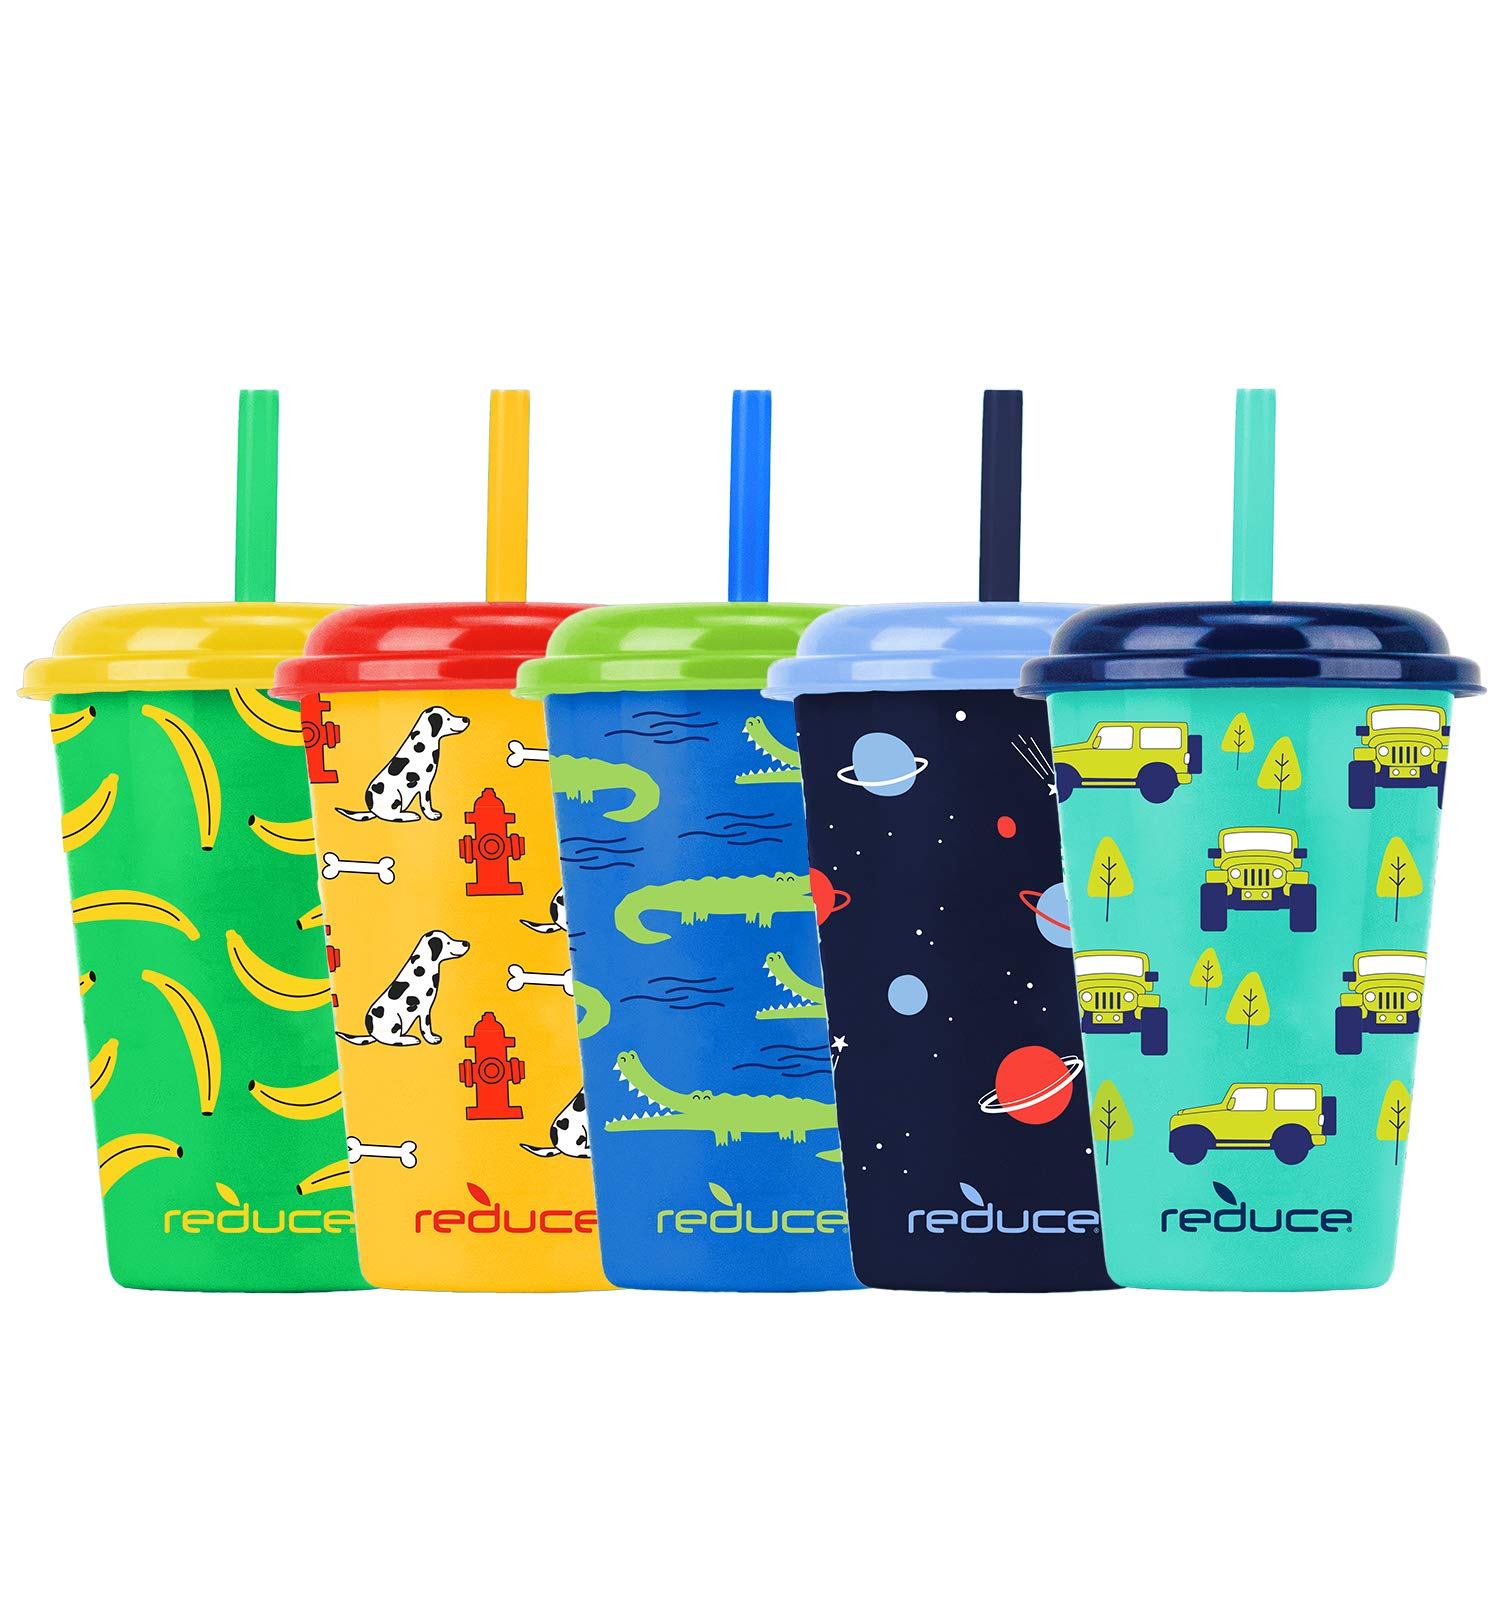 REDUCE GoGo's 12 oz Cup Set, 5 Pack – Plastic Cups with Straws and Lids – Dishwasher Safe, BPA Free – 5 Fun Designs, Wild